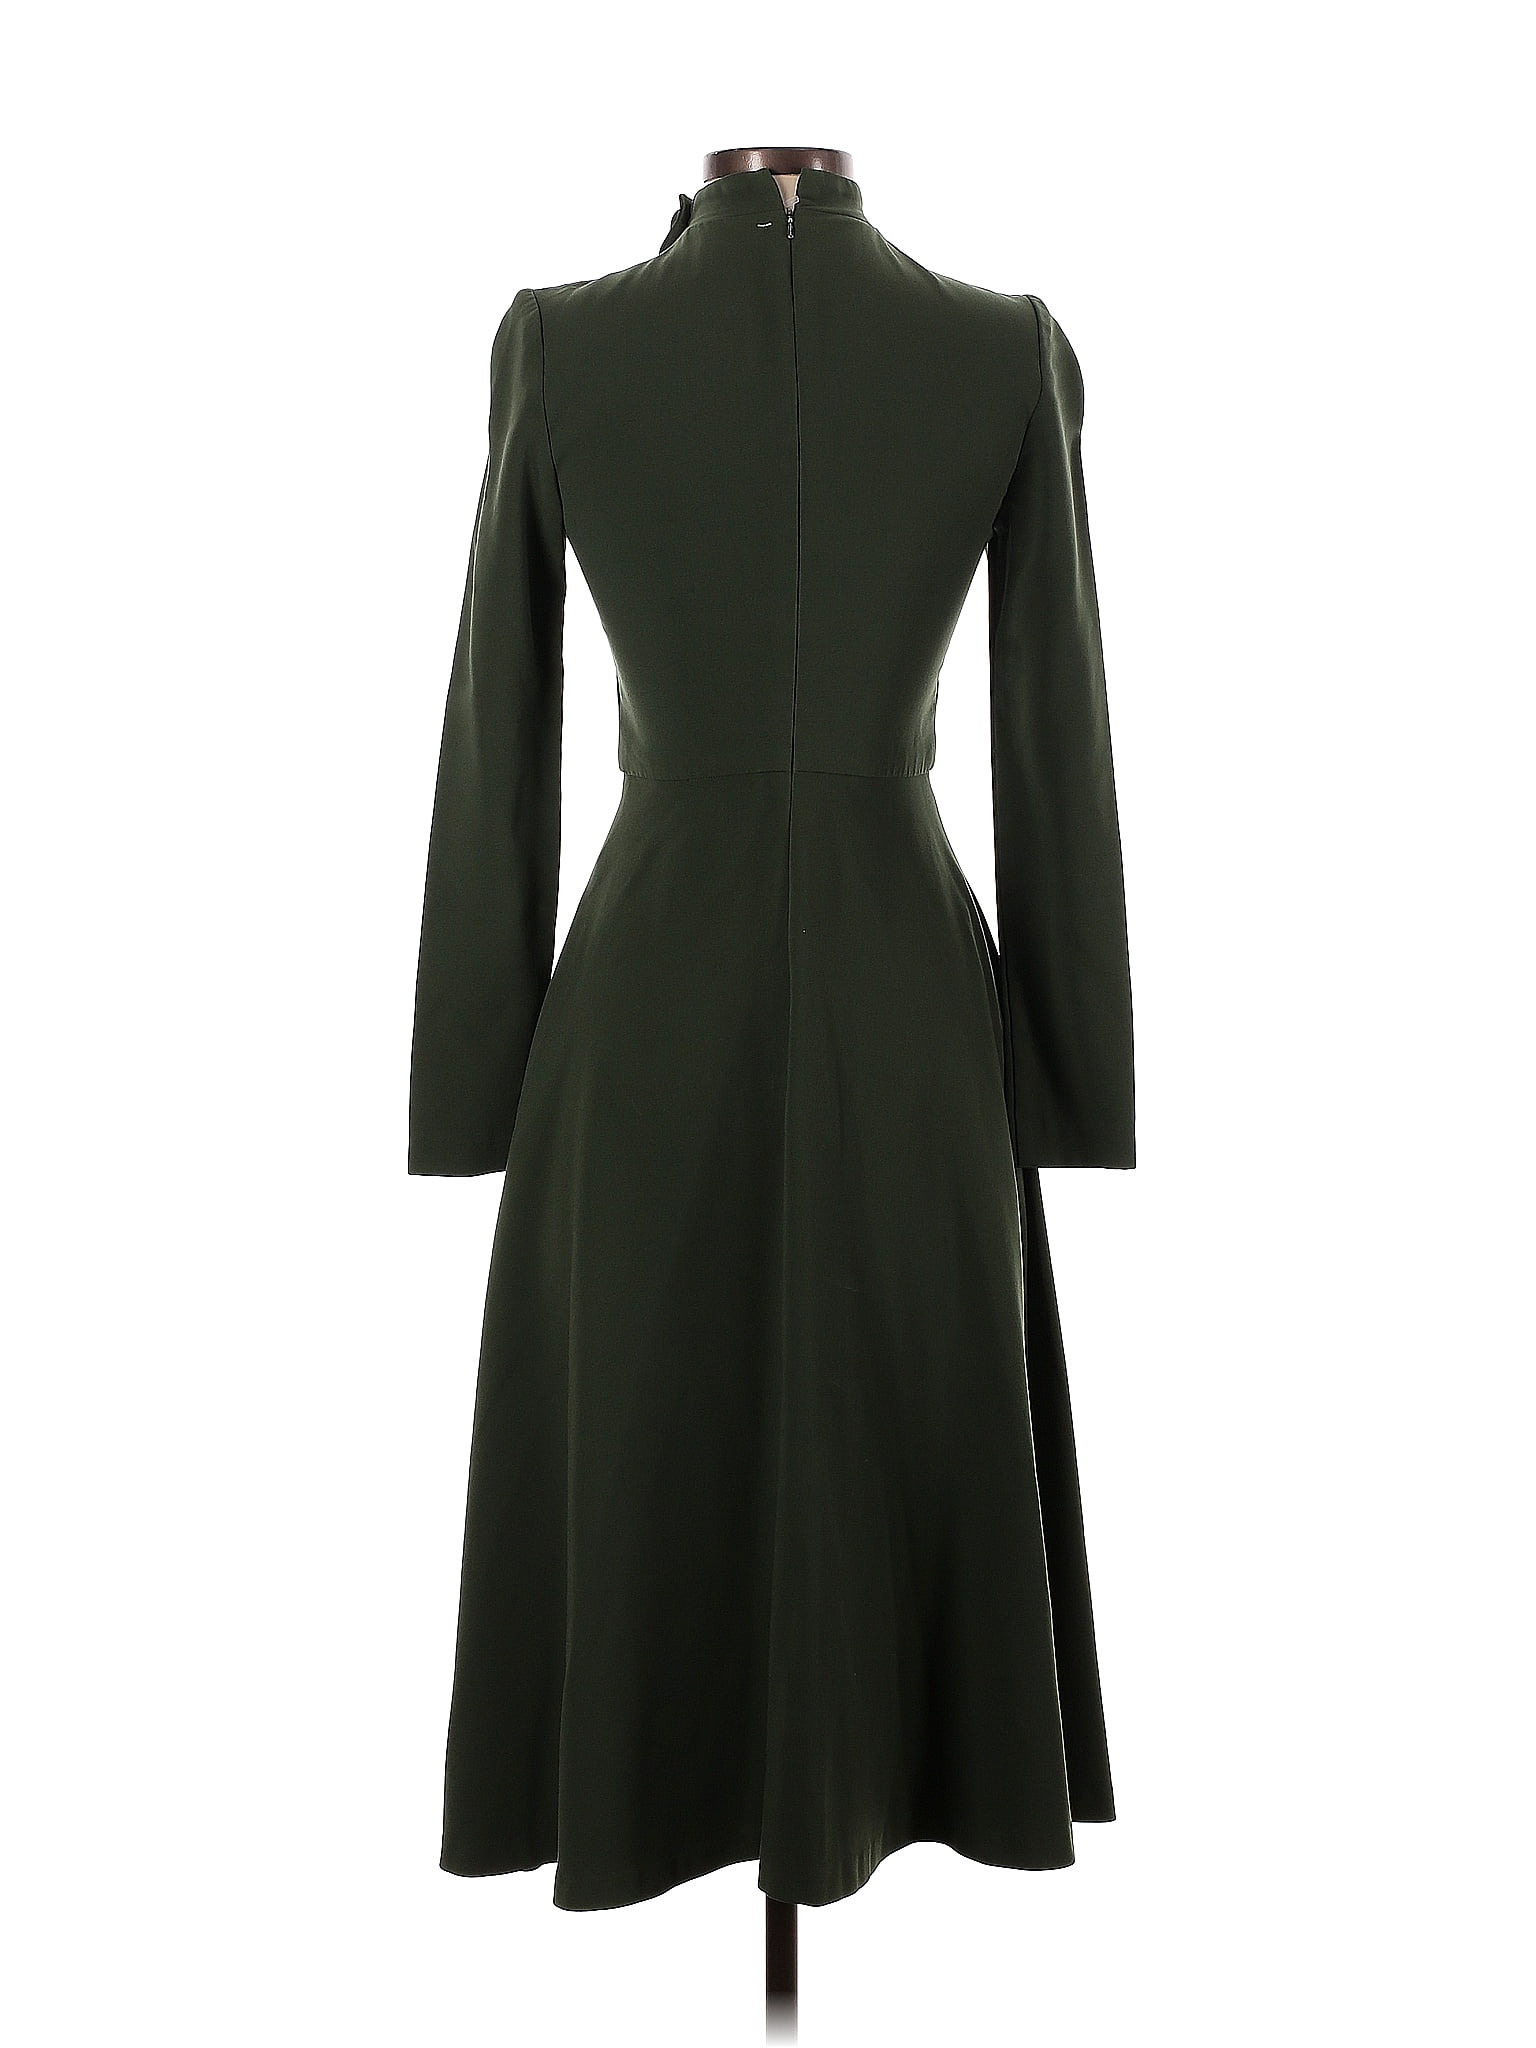 Green Antonia Dress by Black Halo for $62